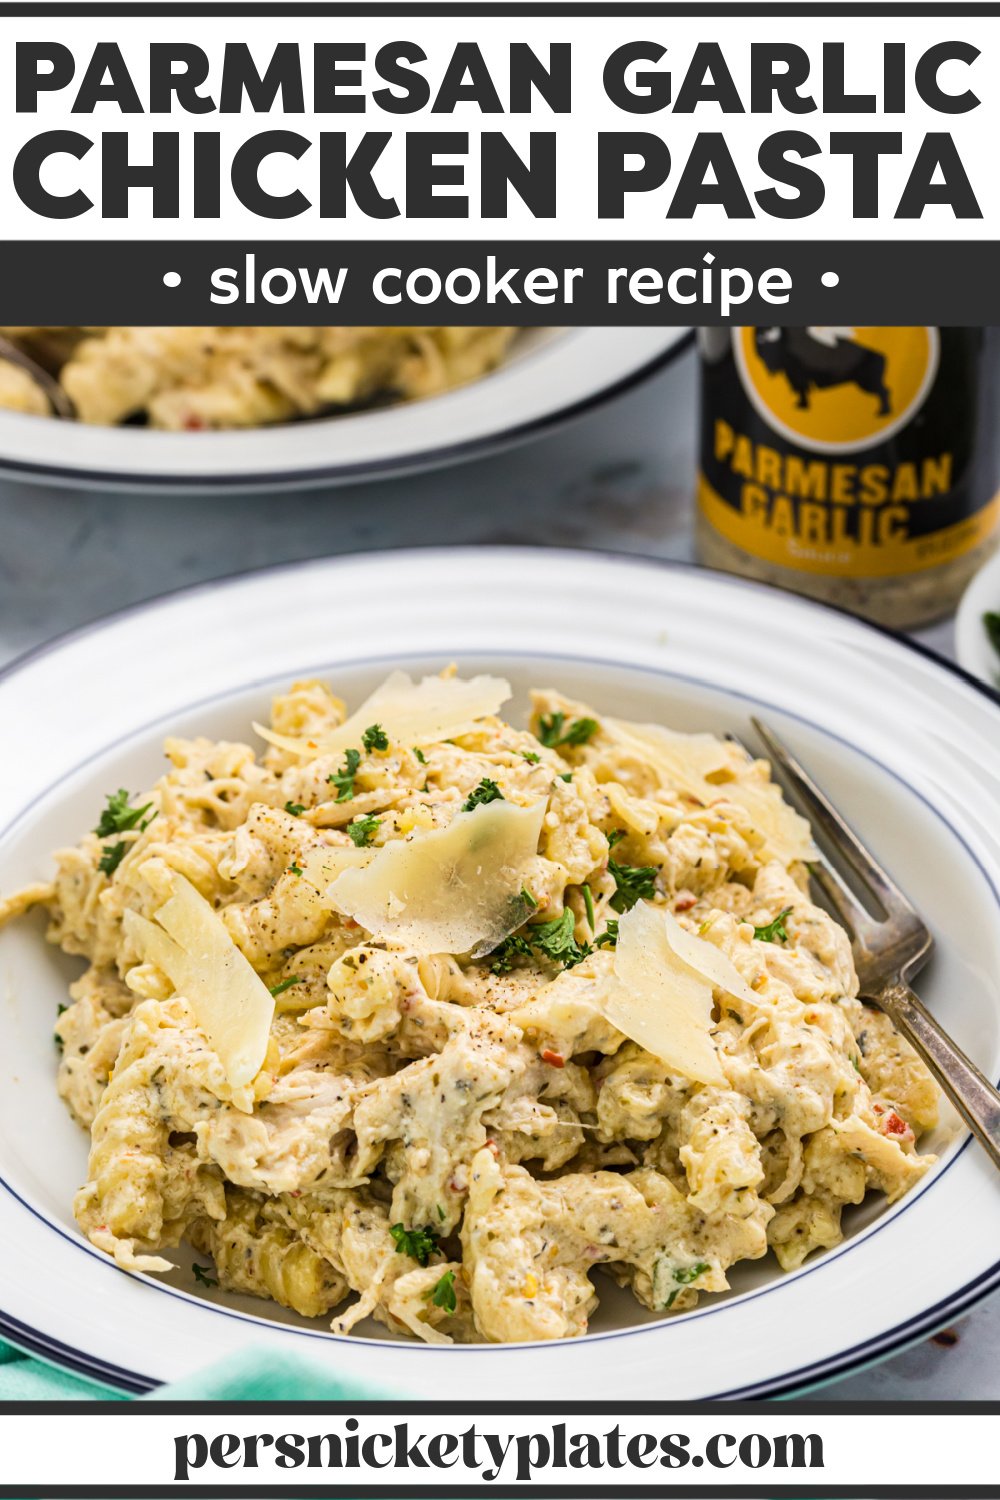 Slow cooker garlic parmesan chicken pasta is made with ready-made garlic parmesan sauce, fresh chicken breasts, cream cheese, parmesan cheese, and tender pasta noodles combined into a creamy, cheesy, garlicky comforting pasta dish. This crock pot meal is perfect for getting the whole family running to the dinner table! | www.persnicketyplates.com